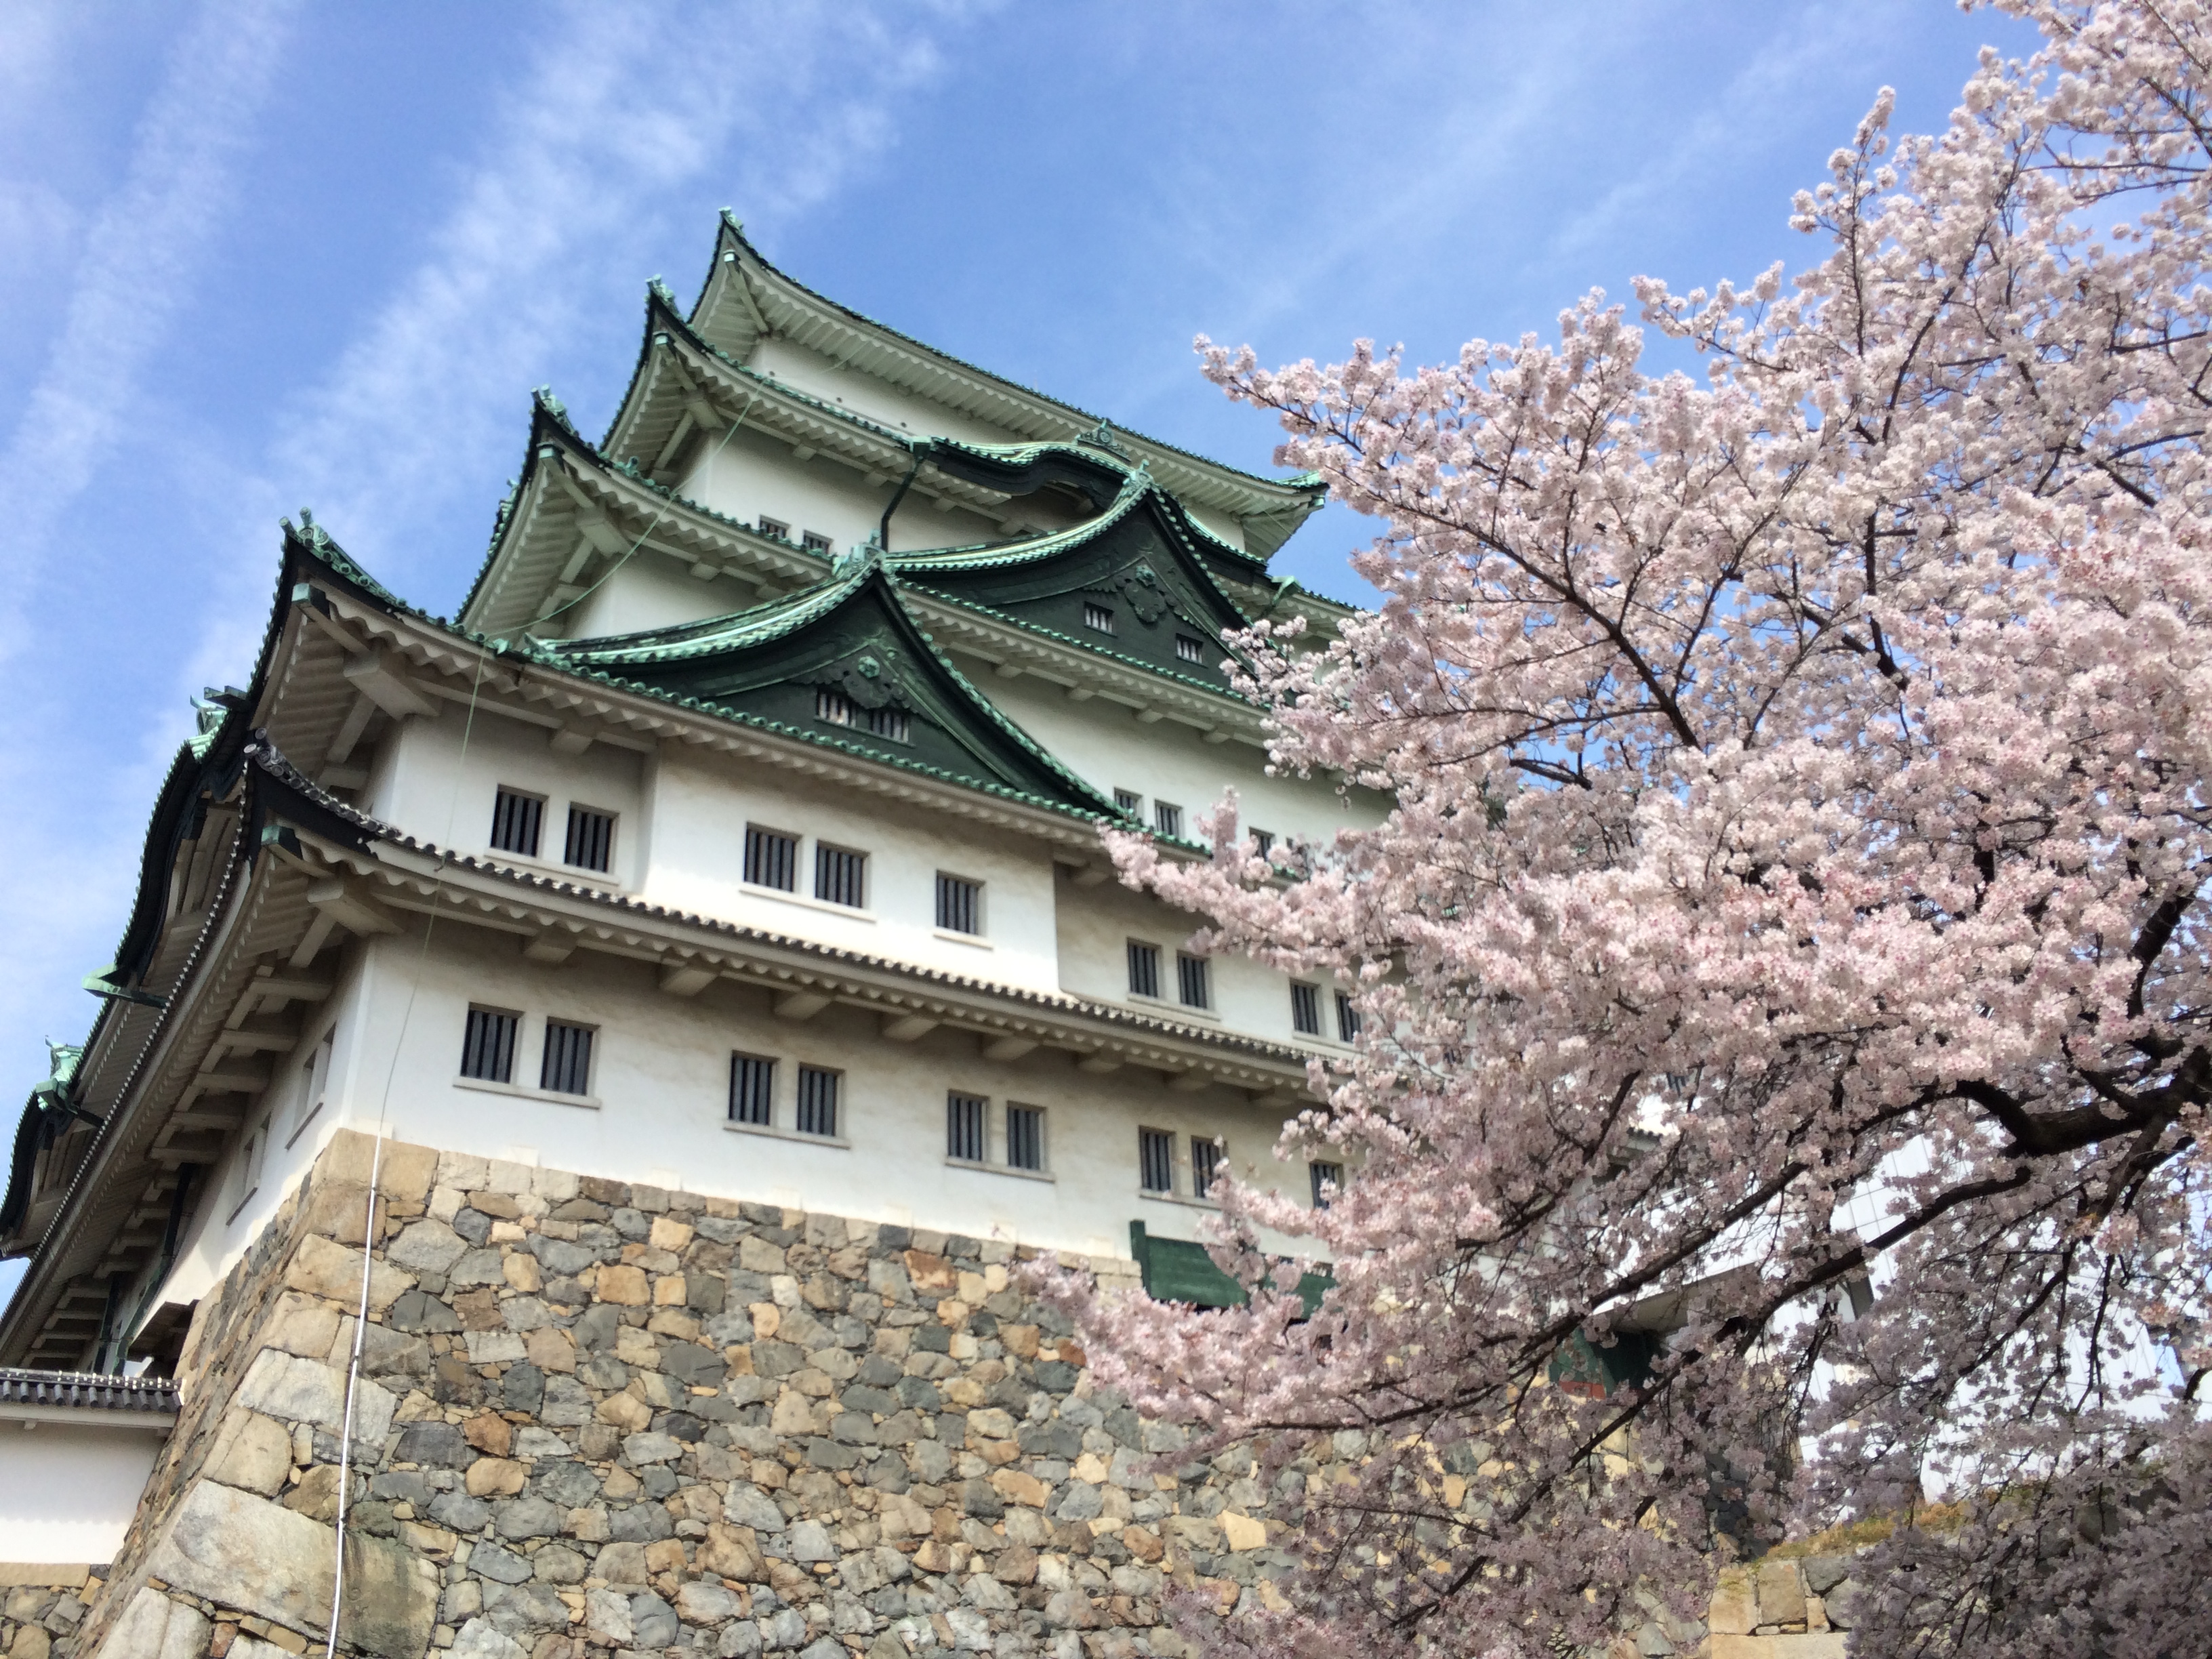 Castle of Nagoya with cherry blossoms